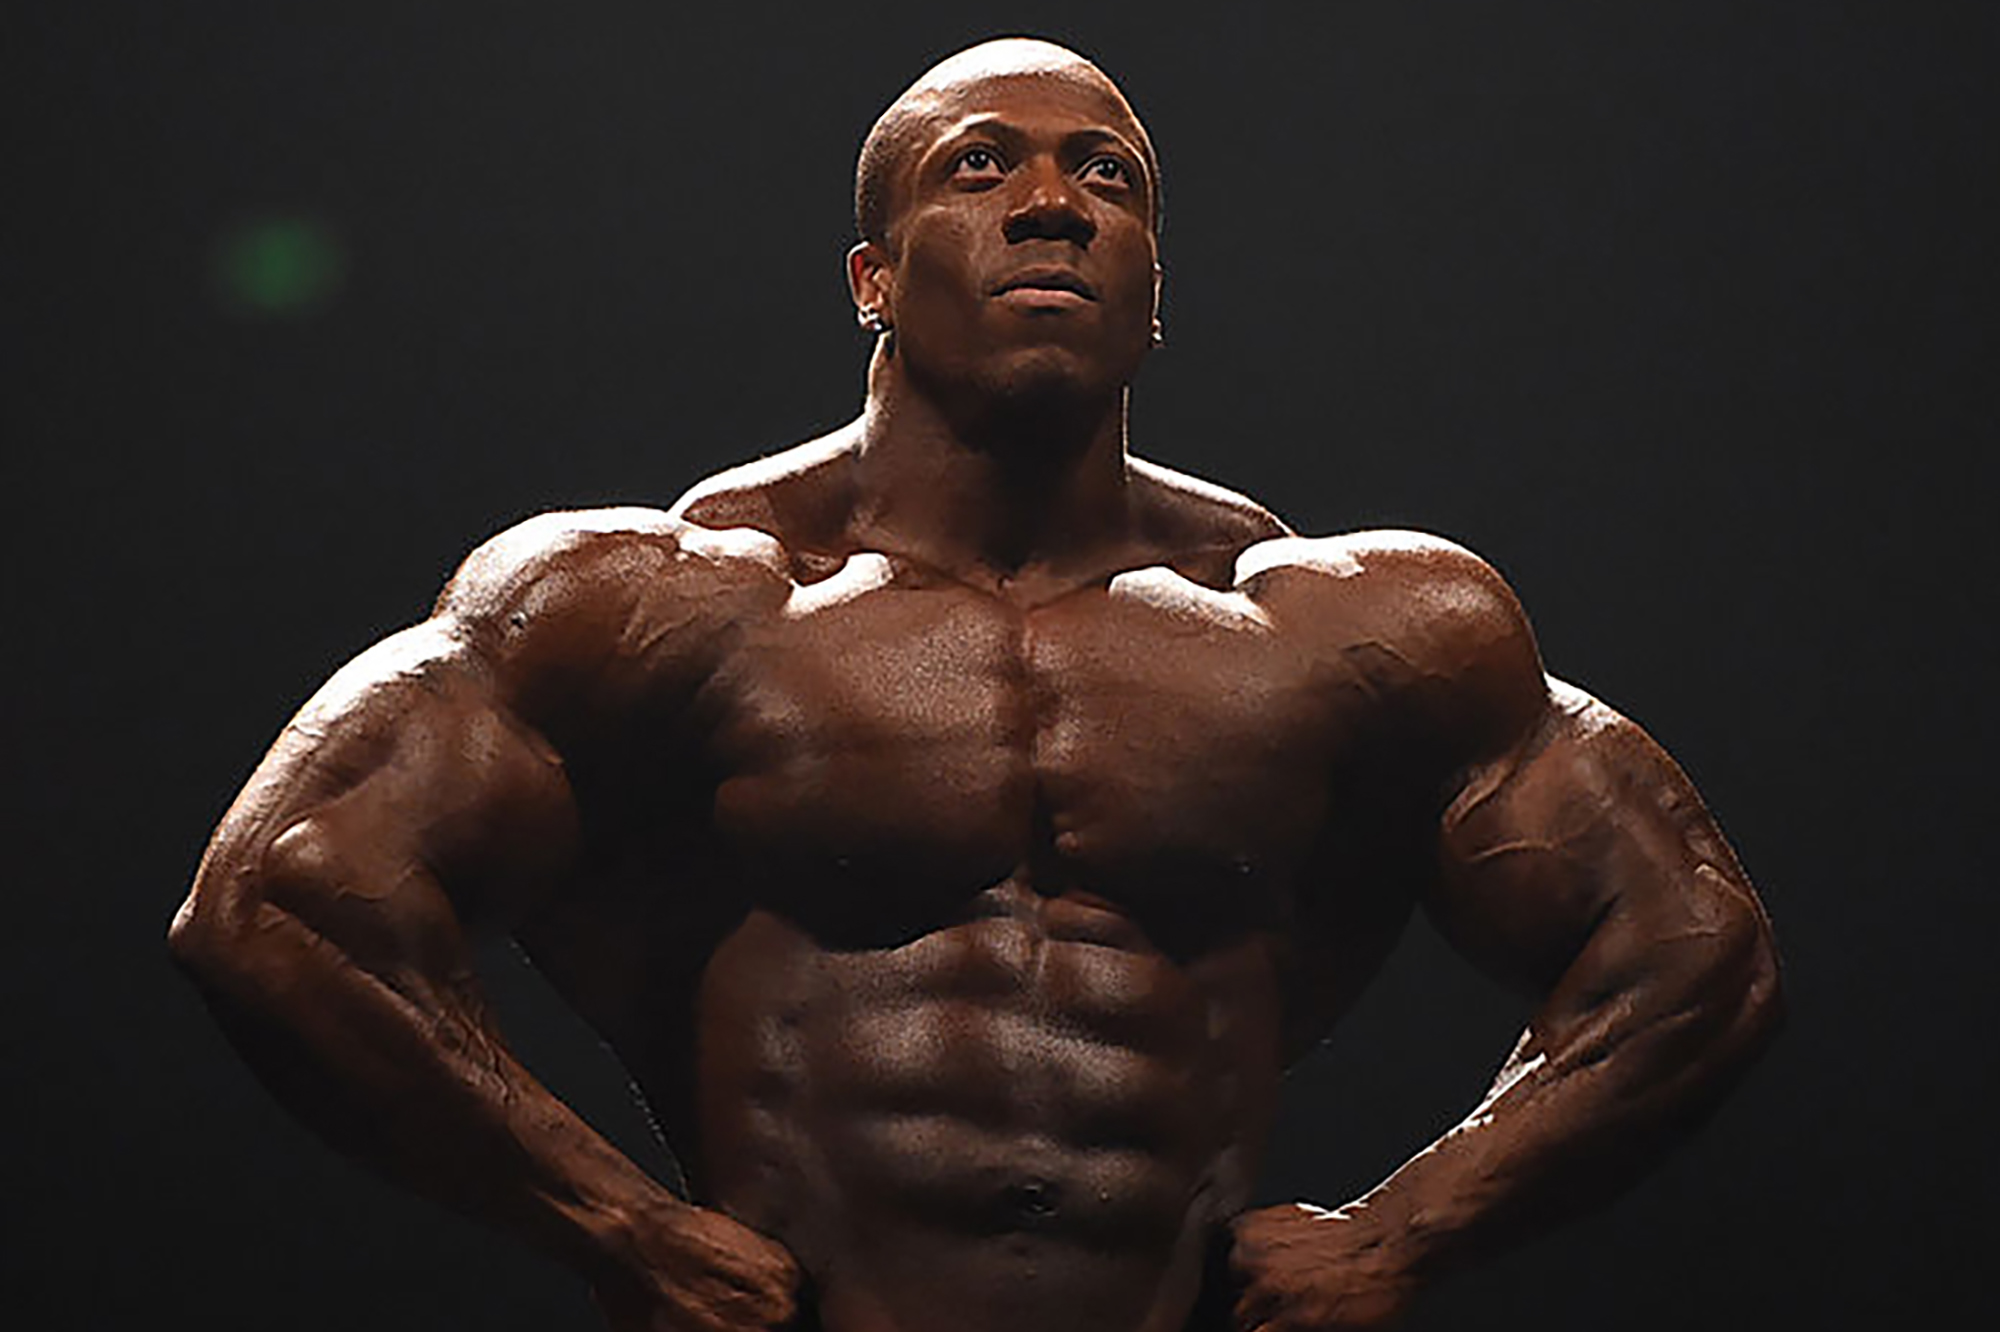 Shawn Rhoden dead at 46 due to heart attack